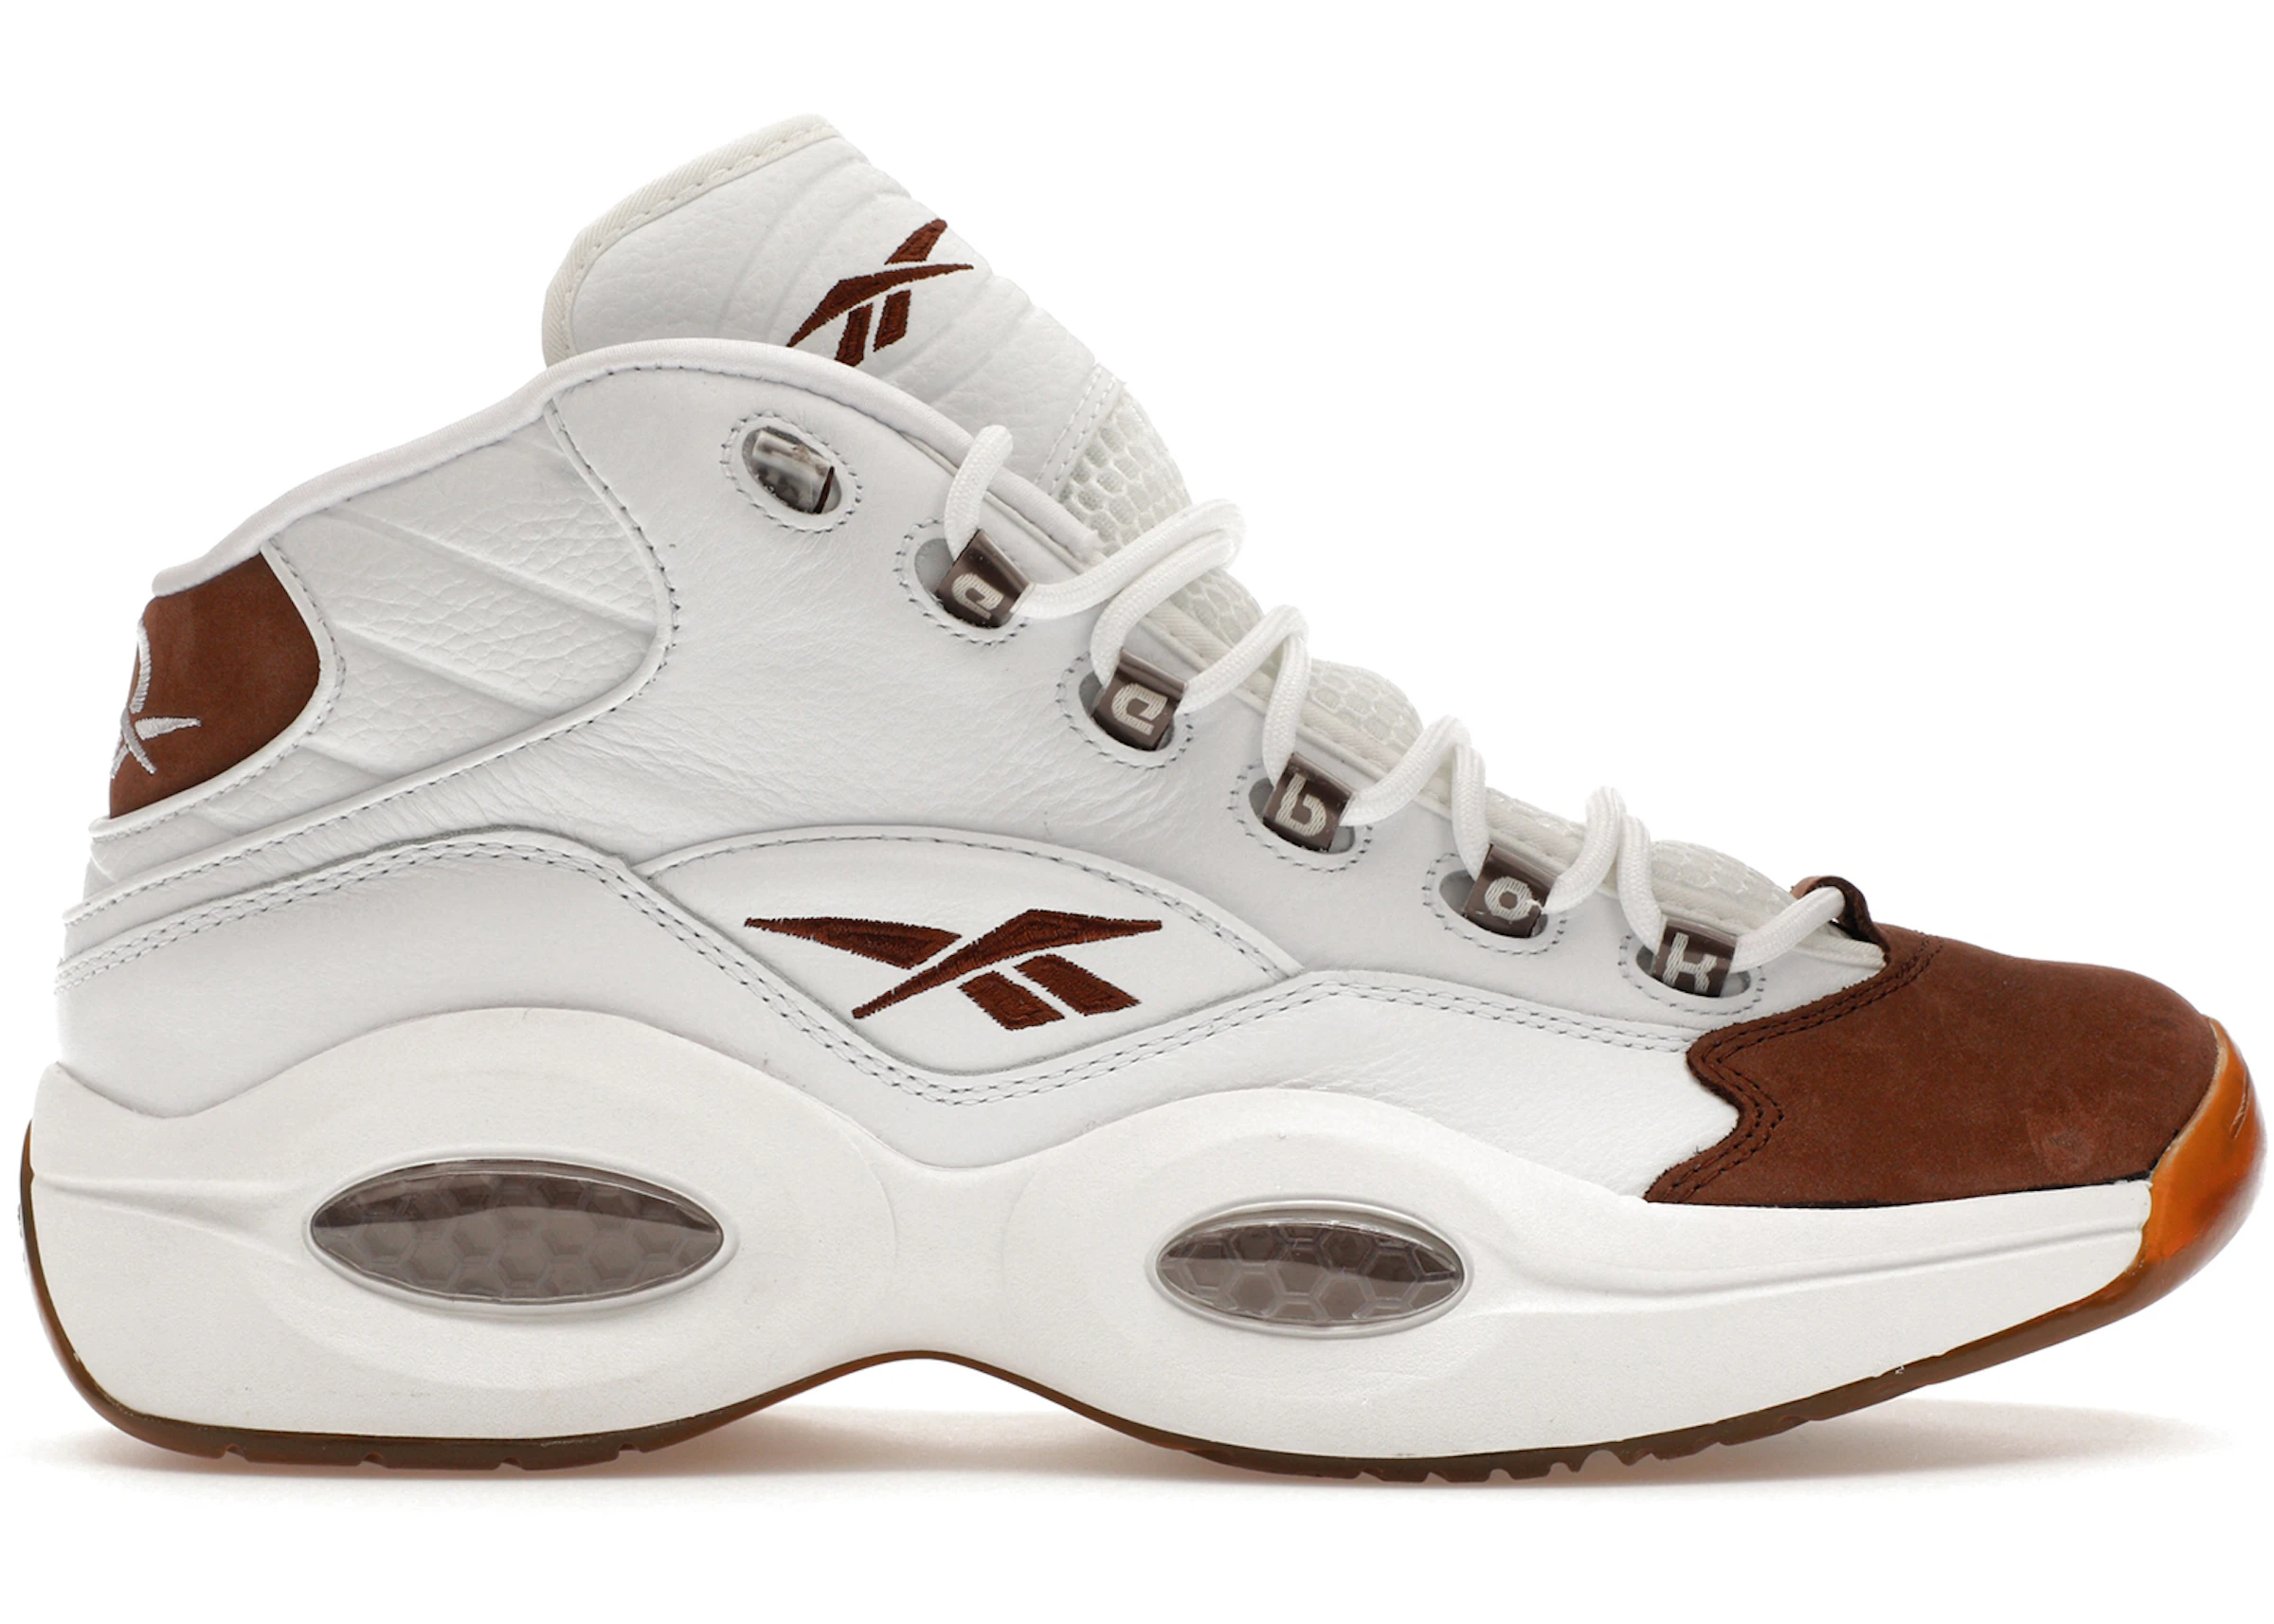 Where Can I Buy Reebok Questions?